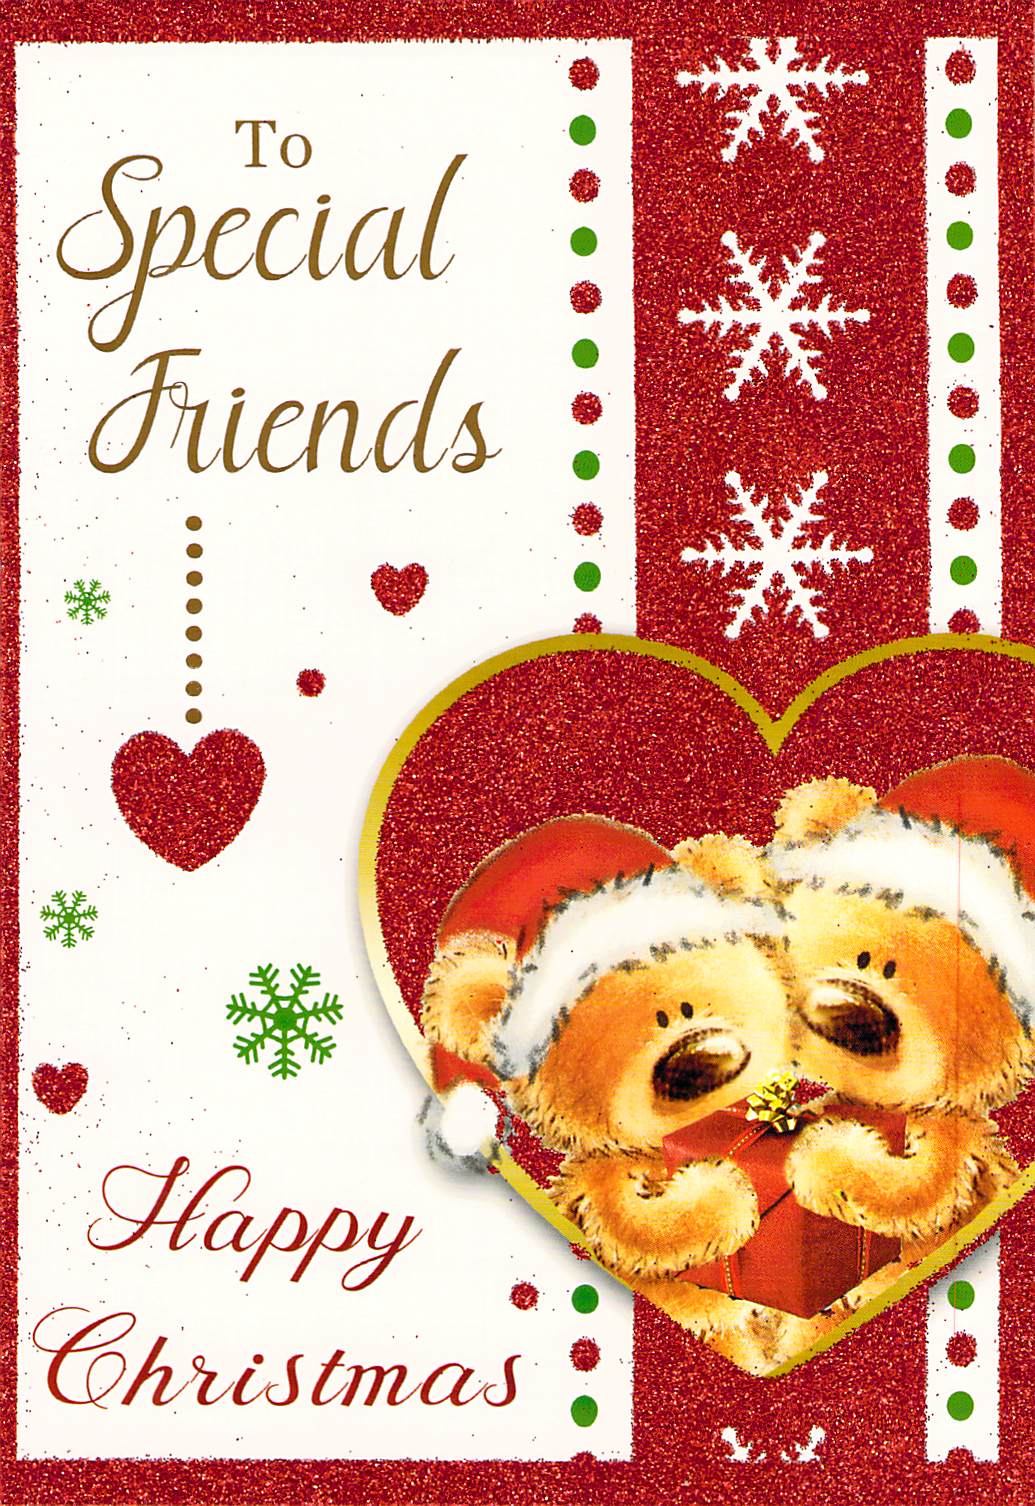 Christmas - Friends - Greeting Card - Multi Buy Discount